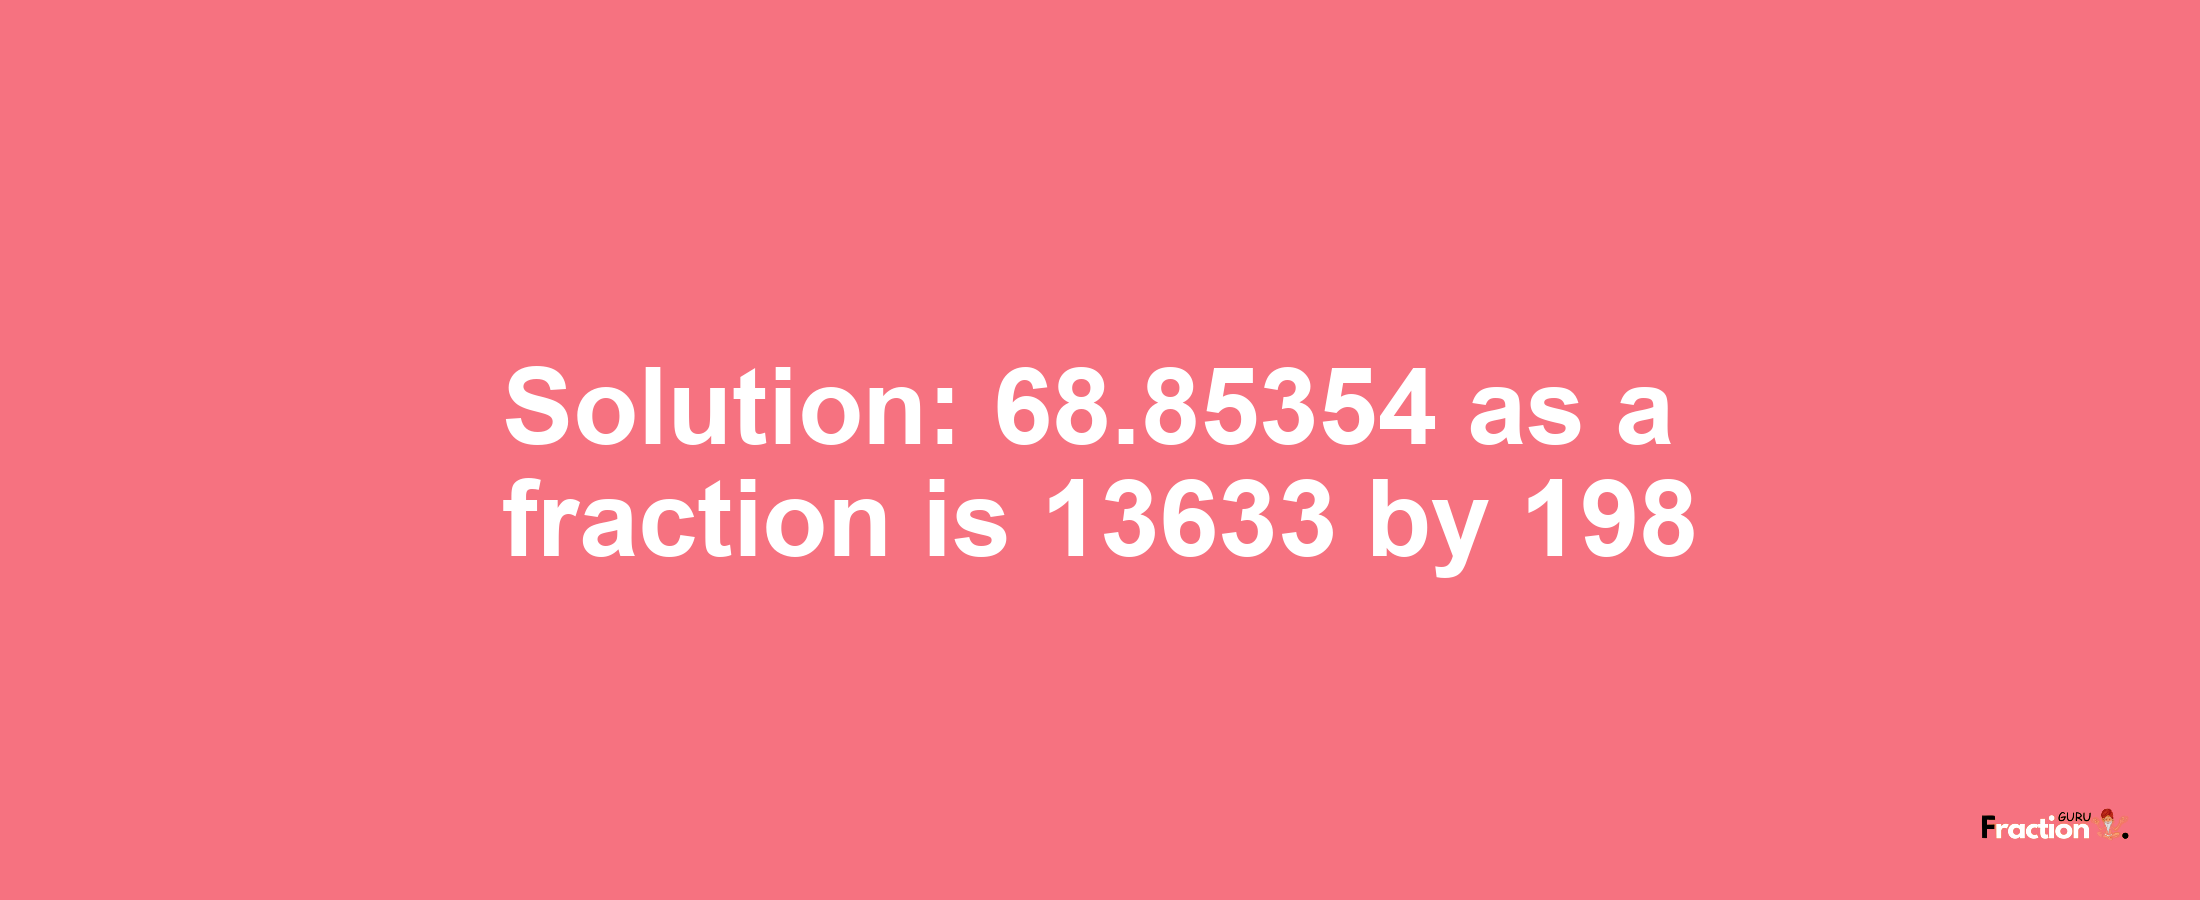 Solution:68.85354 as a fraction is 13633/198